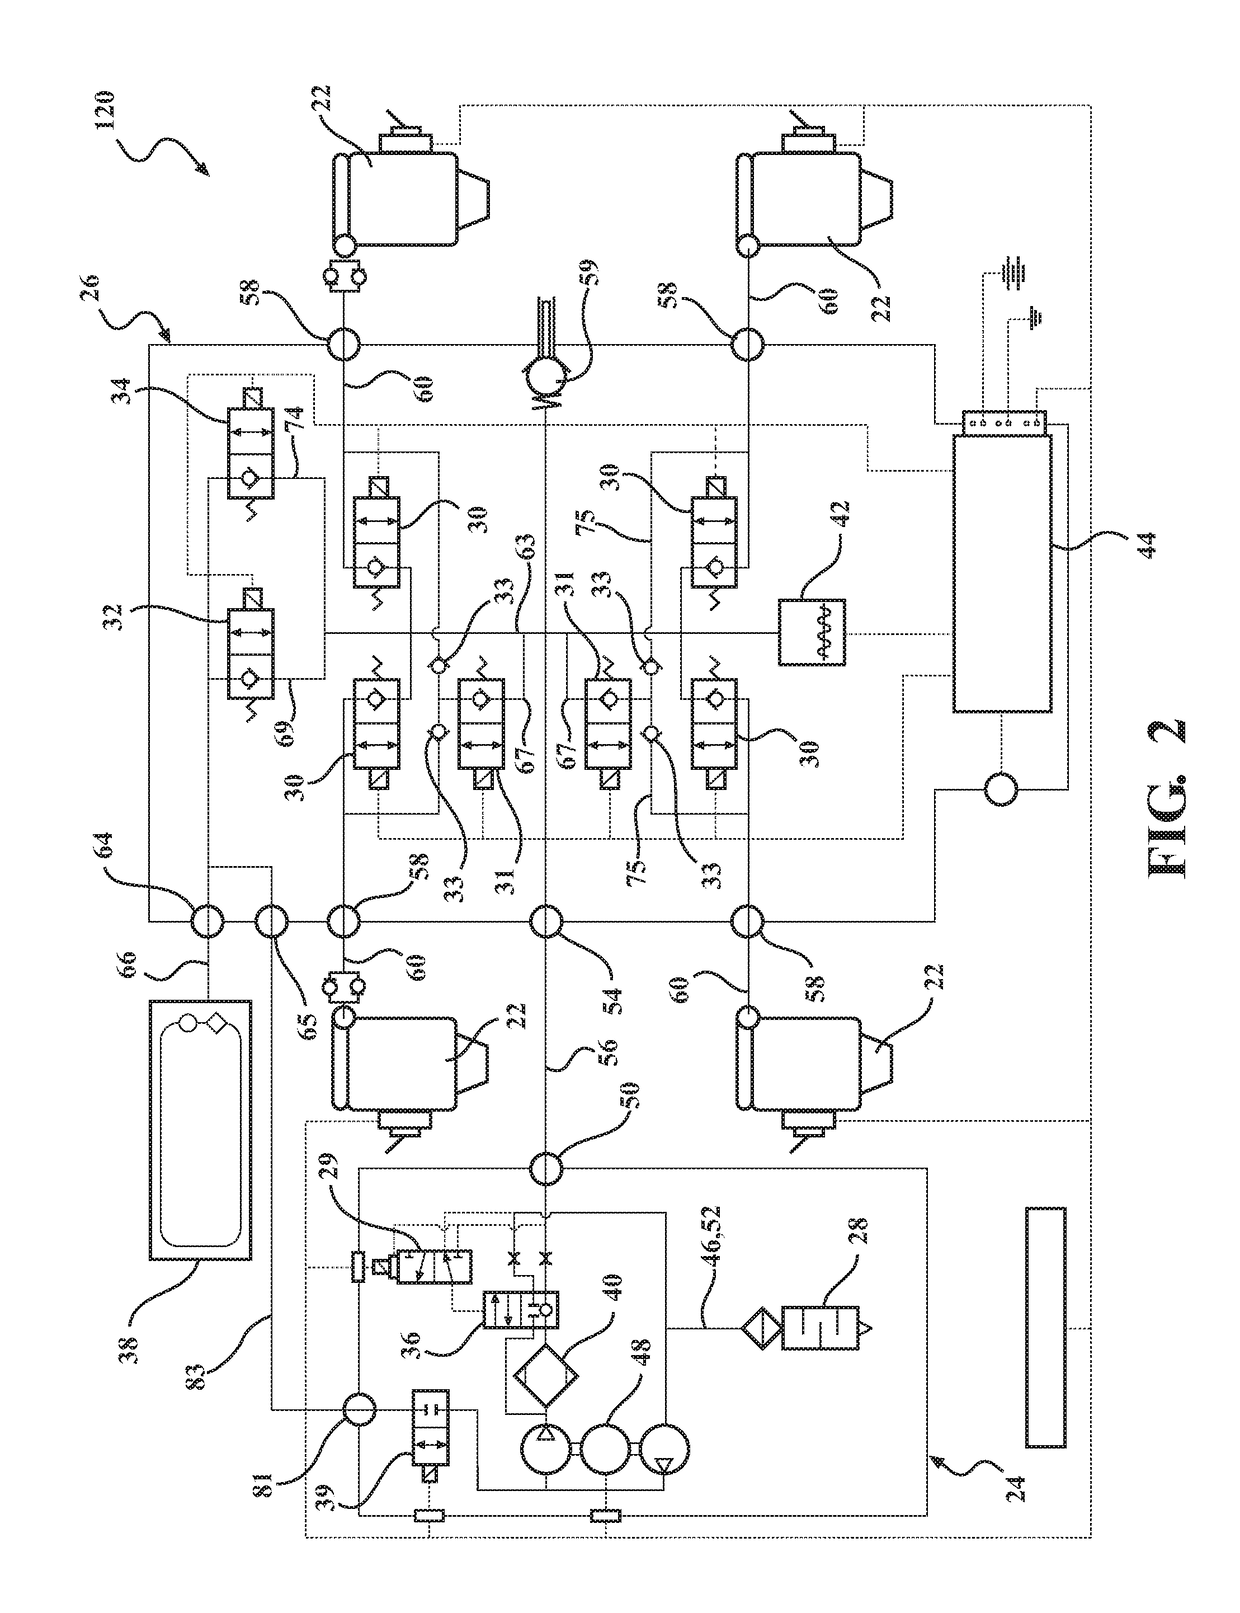 Vehicle Suspension Control System With High Flow Exhaust Mechanization